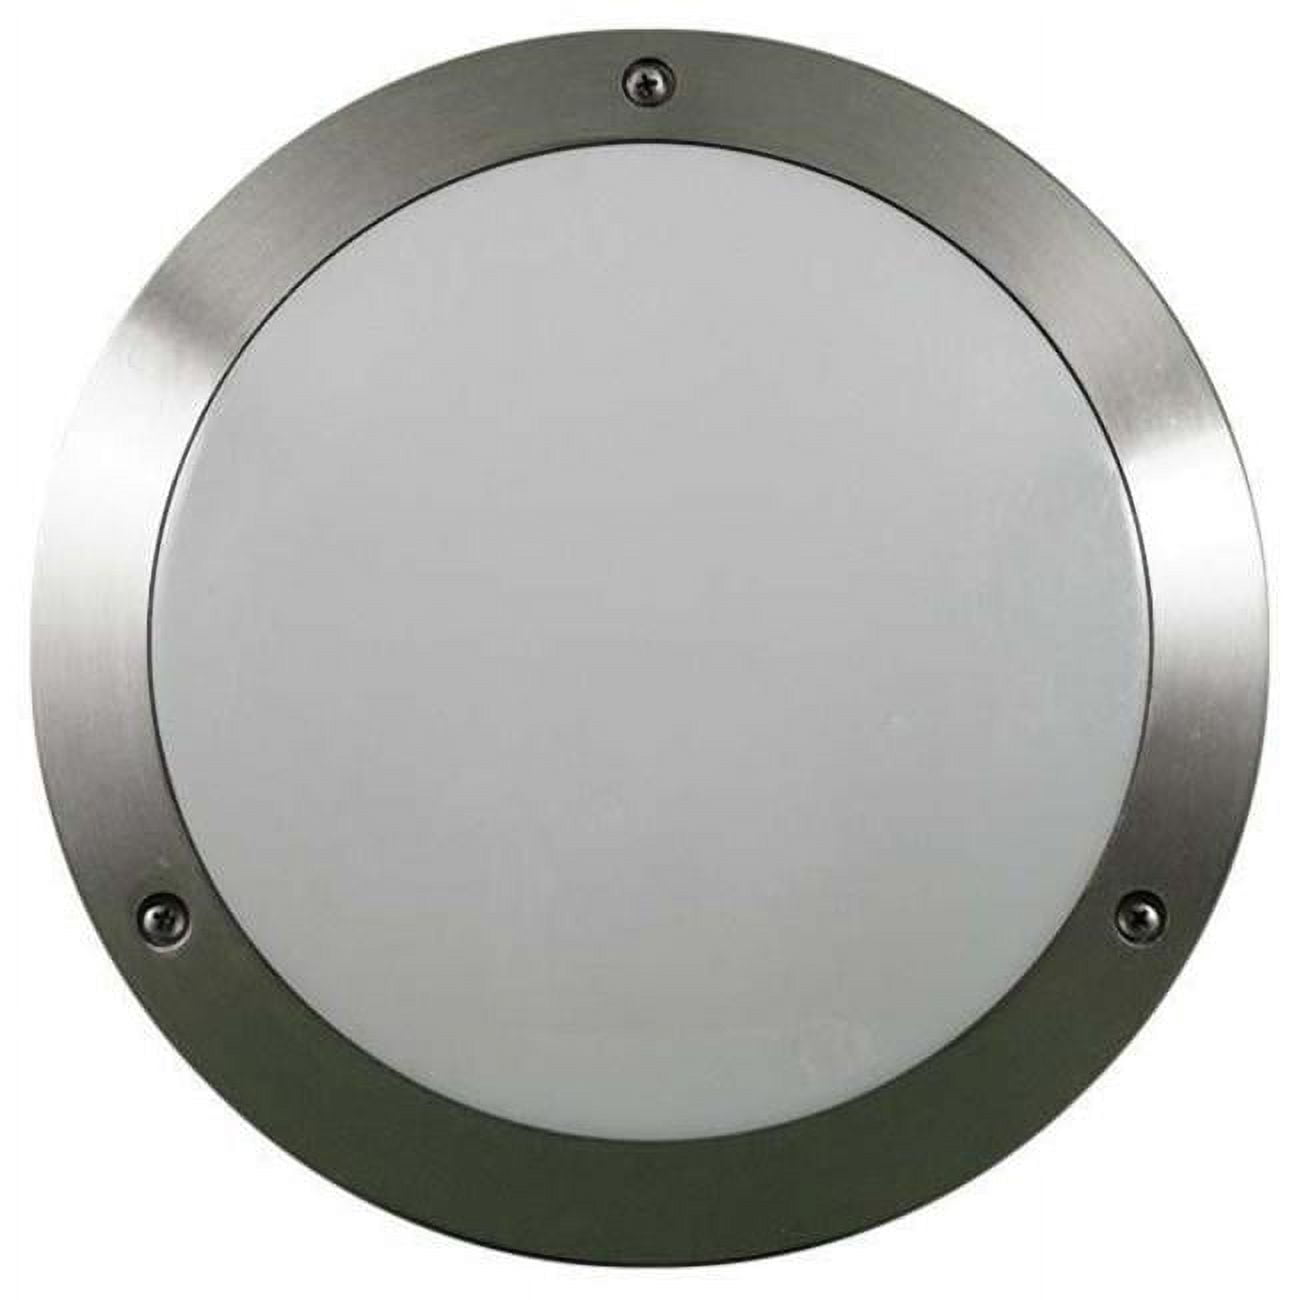 Picture of Dabmar Lighting W3983-SS Powder Coated Cast Aluminum Surface Mounted Wall Fixture - 26W 120V, Stainless Steel